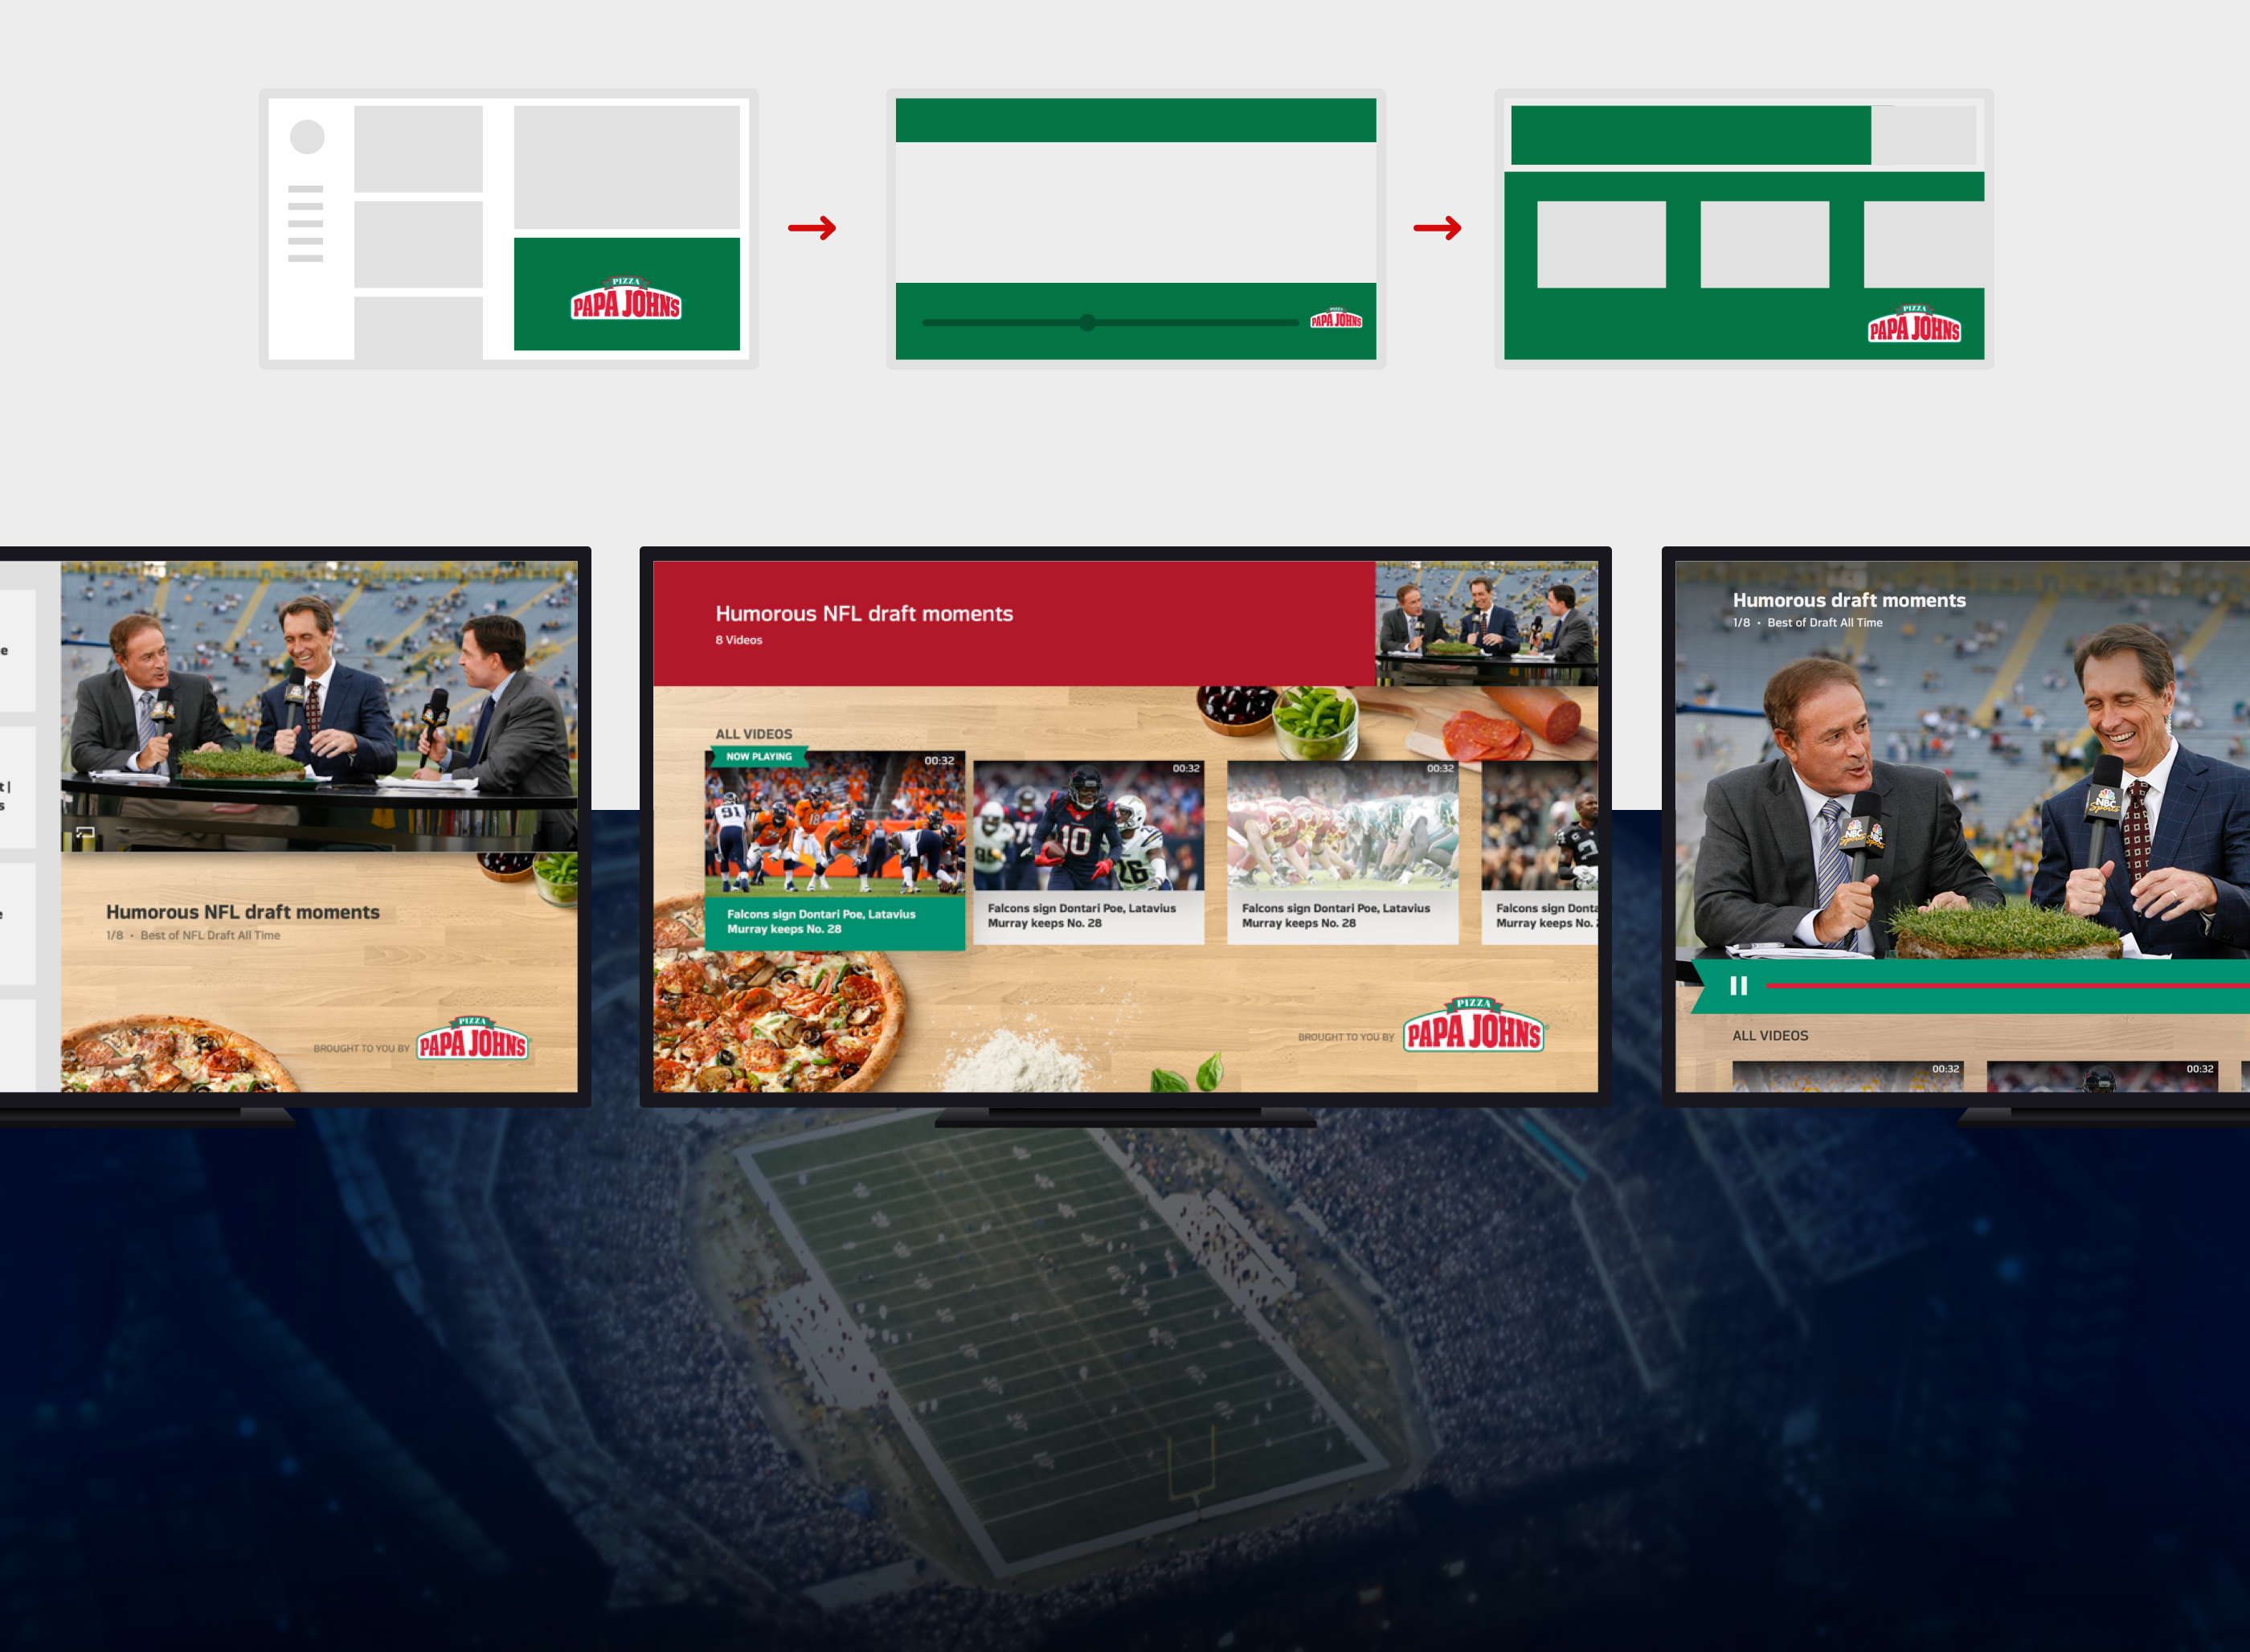 Screens from the app with sponsorship placements